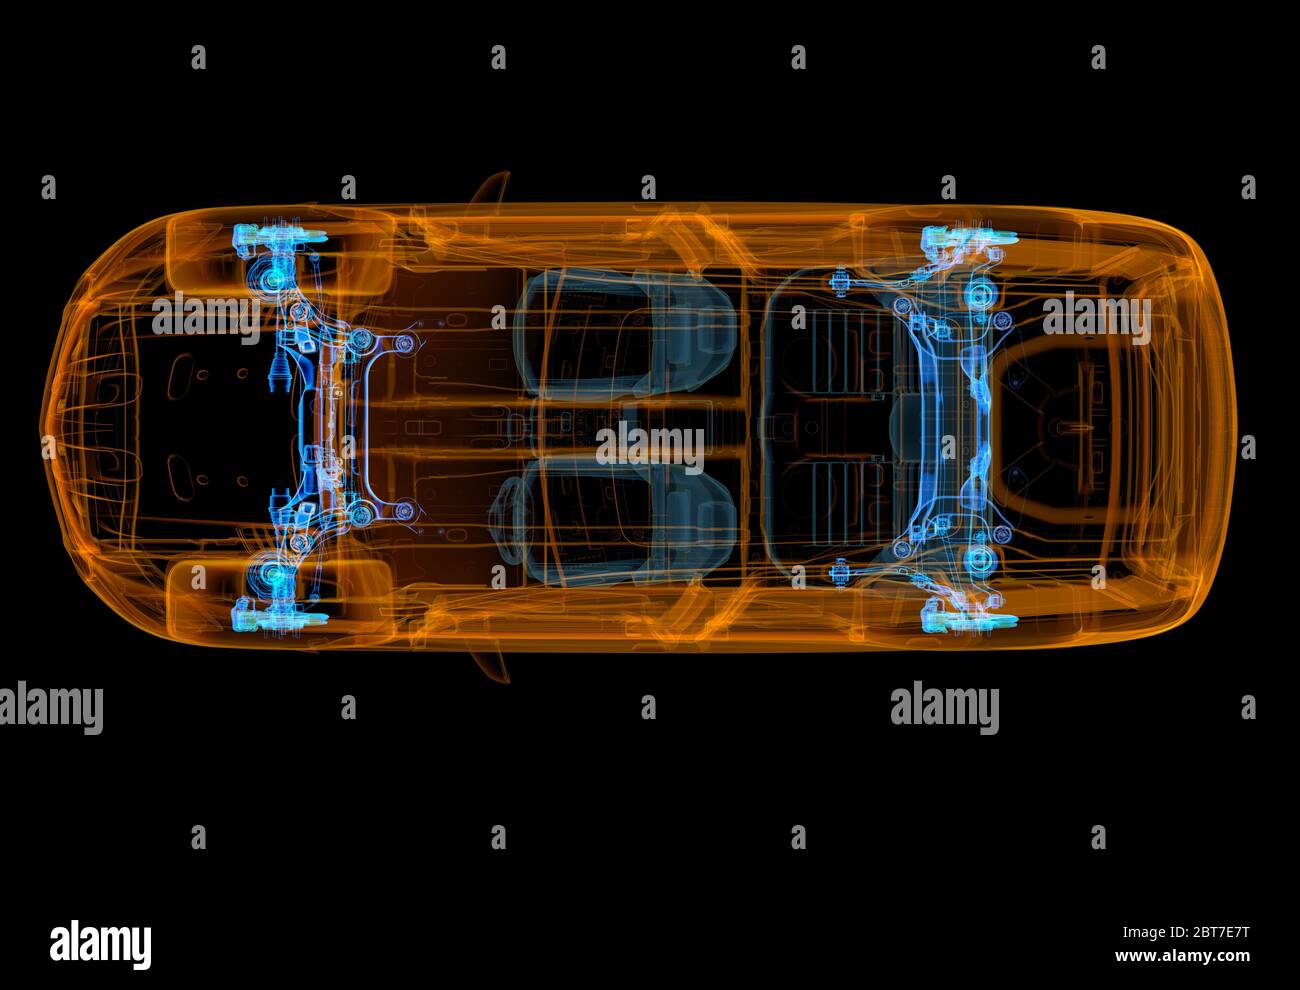 Technical 3d illustration of SUV car with x-ray effect. Brakes and suspension systems. Top view on black background. Stock Photo